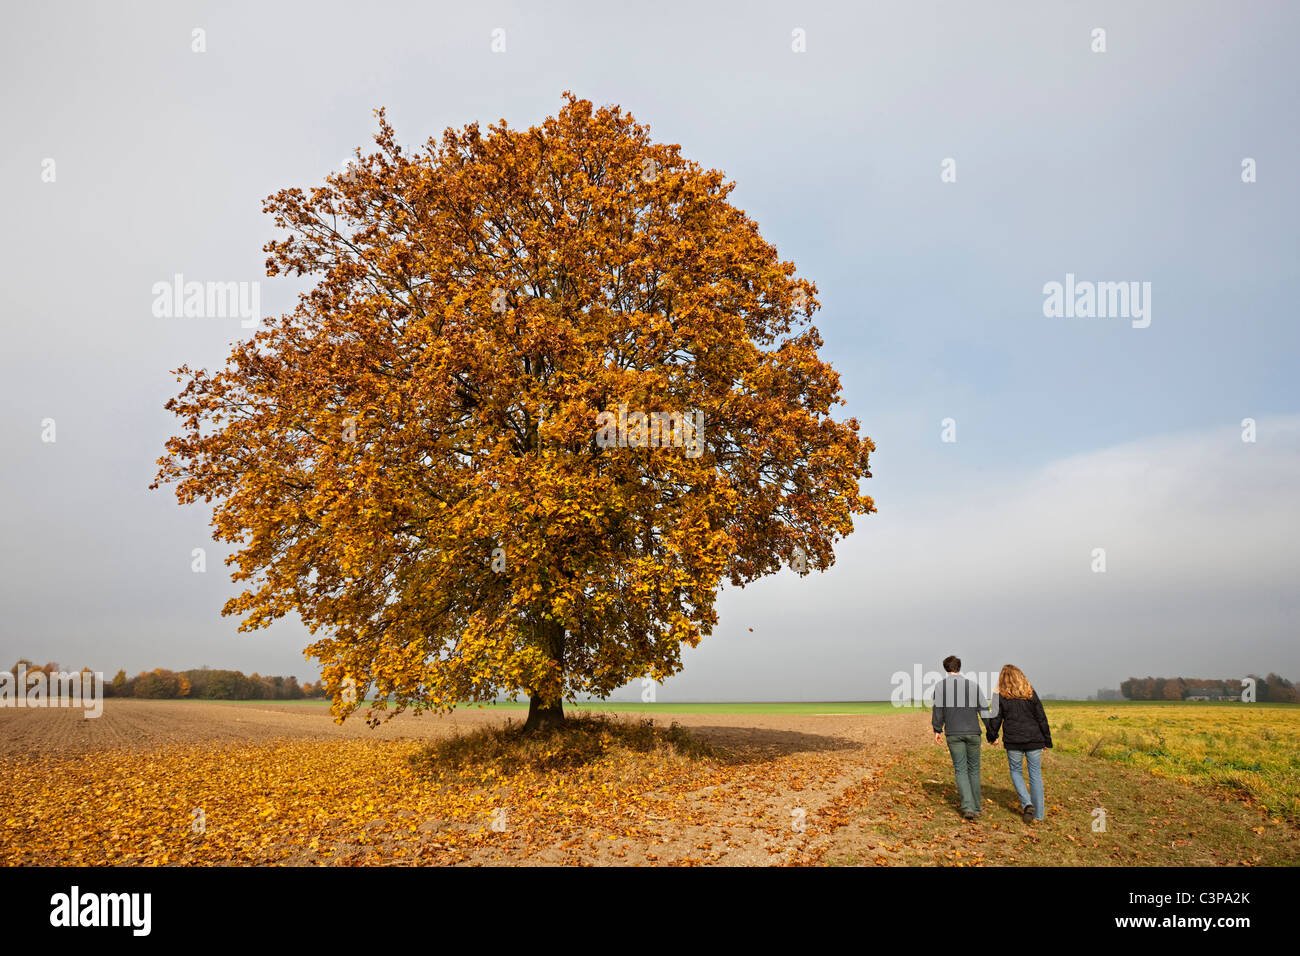 Germany, Bavaria, Couple walking hand in hand, rear view Stock Photo